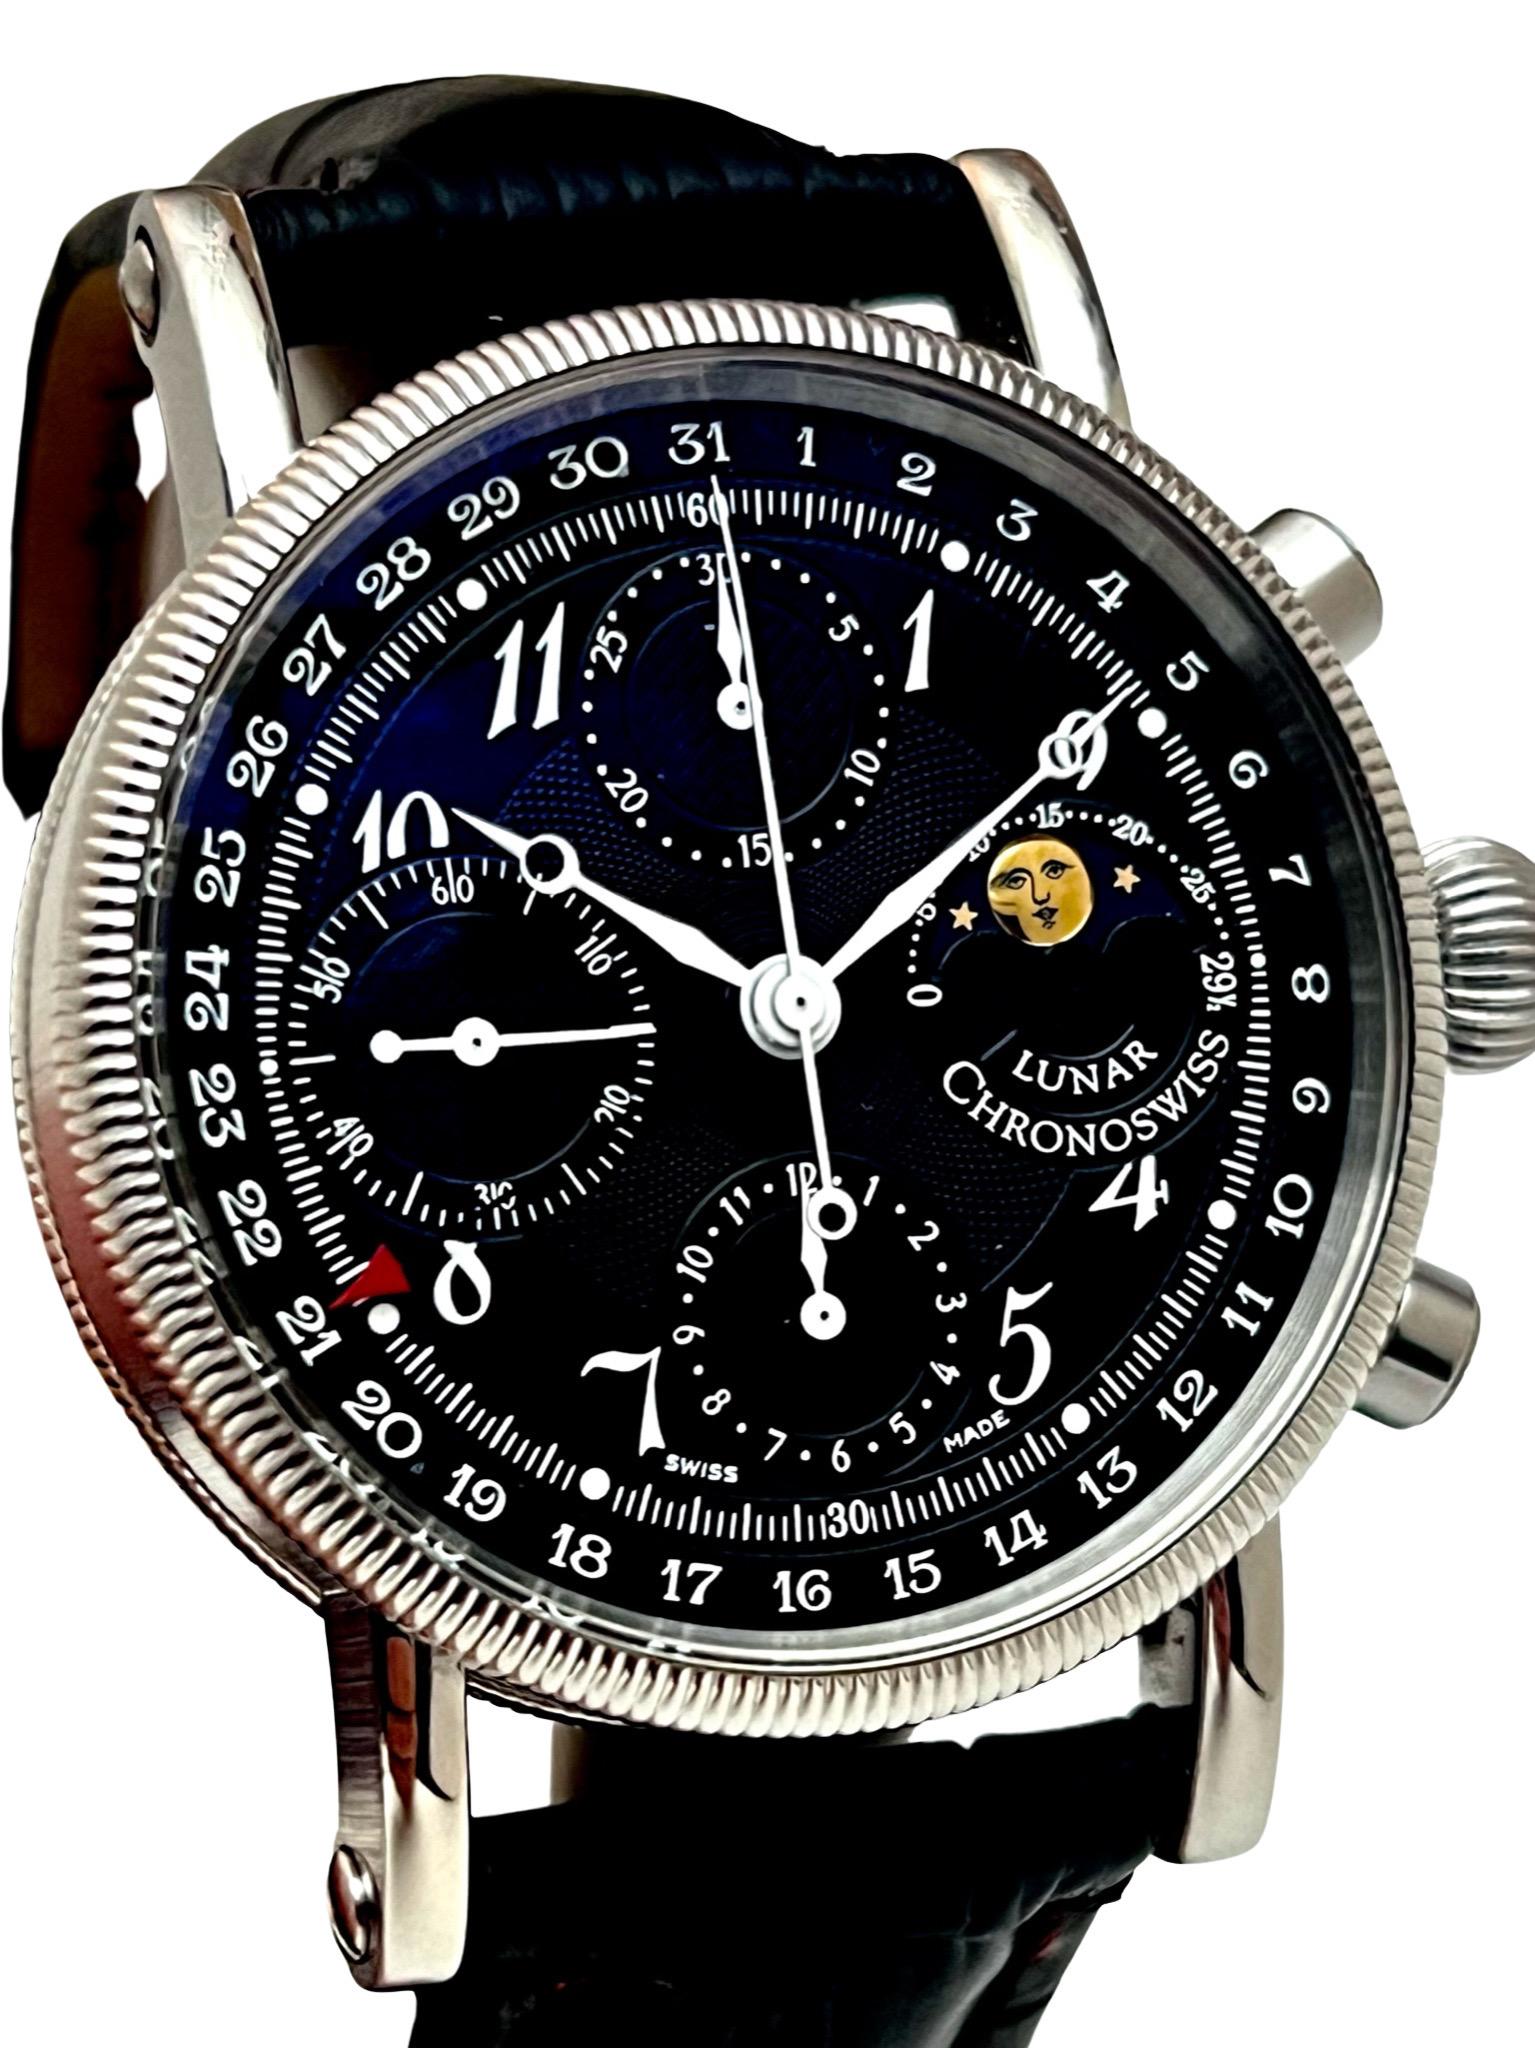 Vintage Chronoswiss Lunar Chronograph In Good Condition For Sale In London, GB